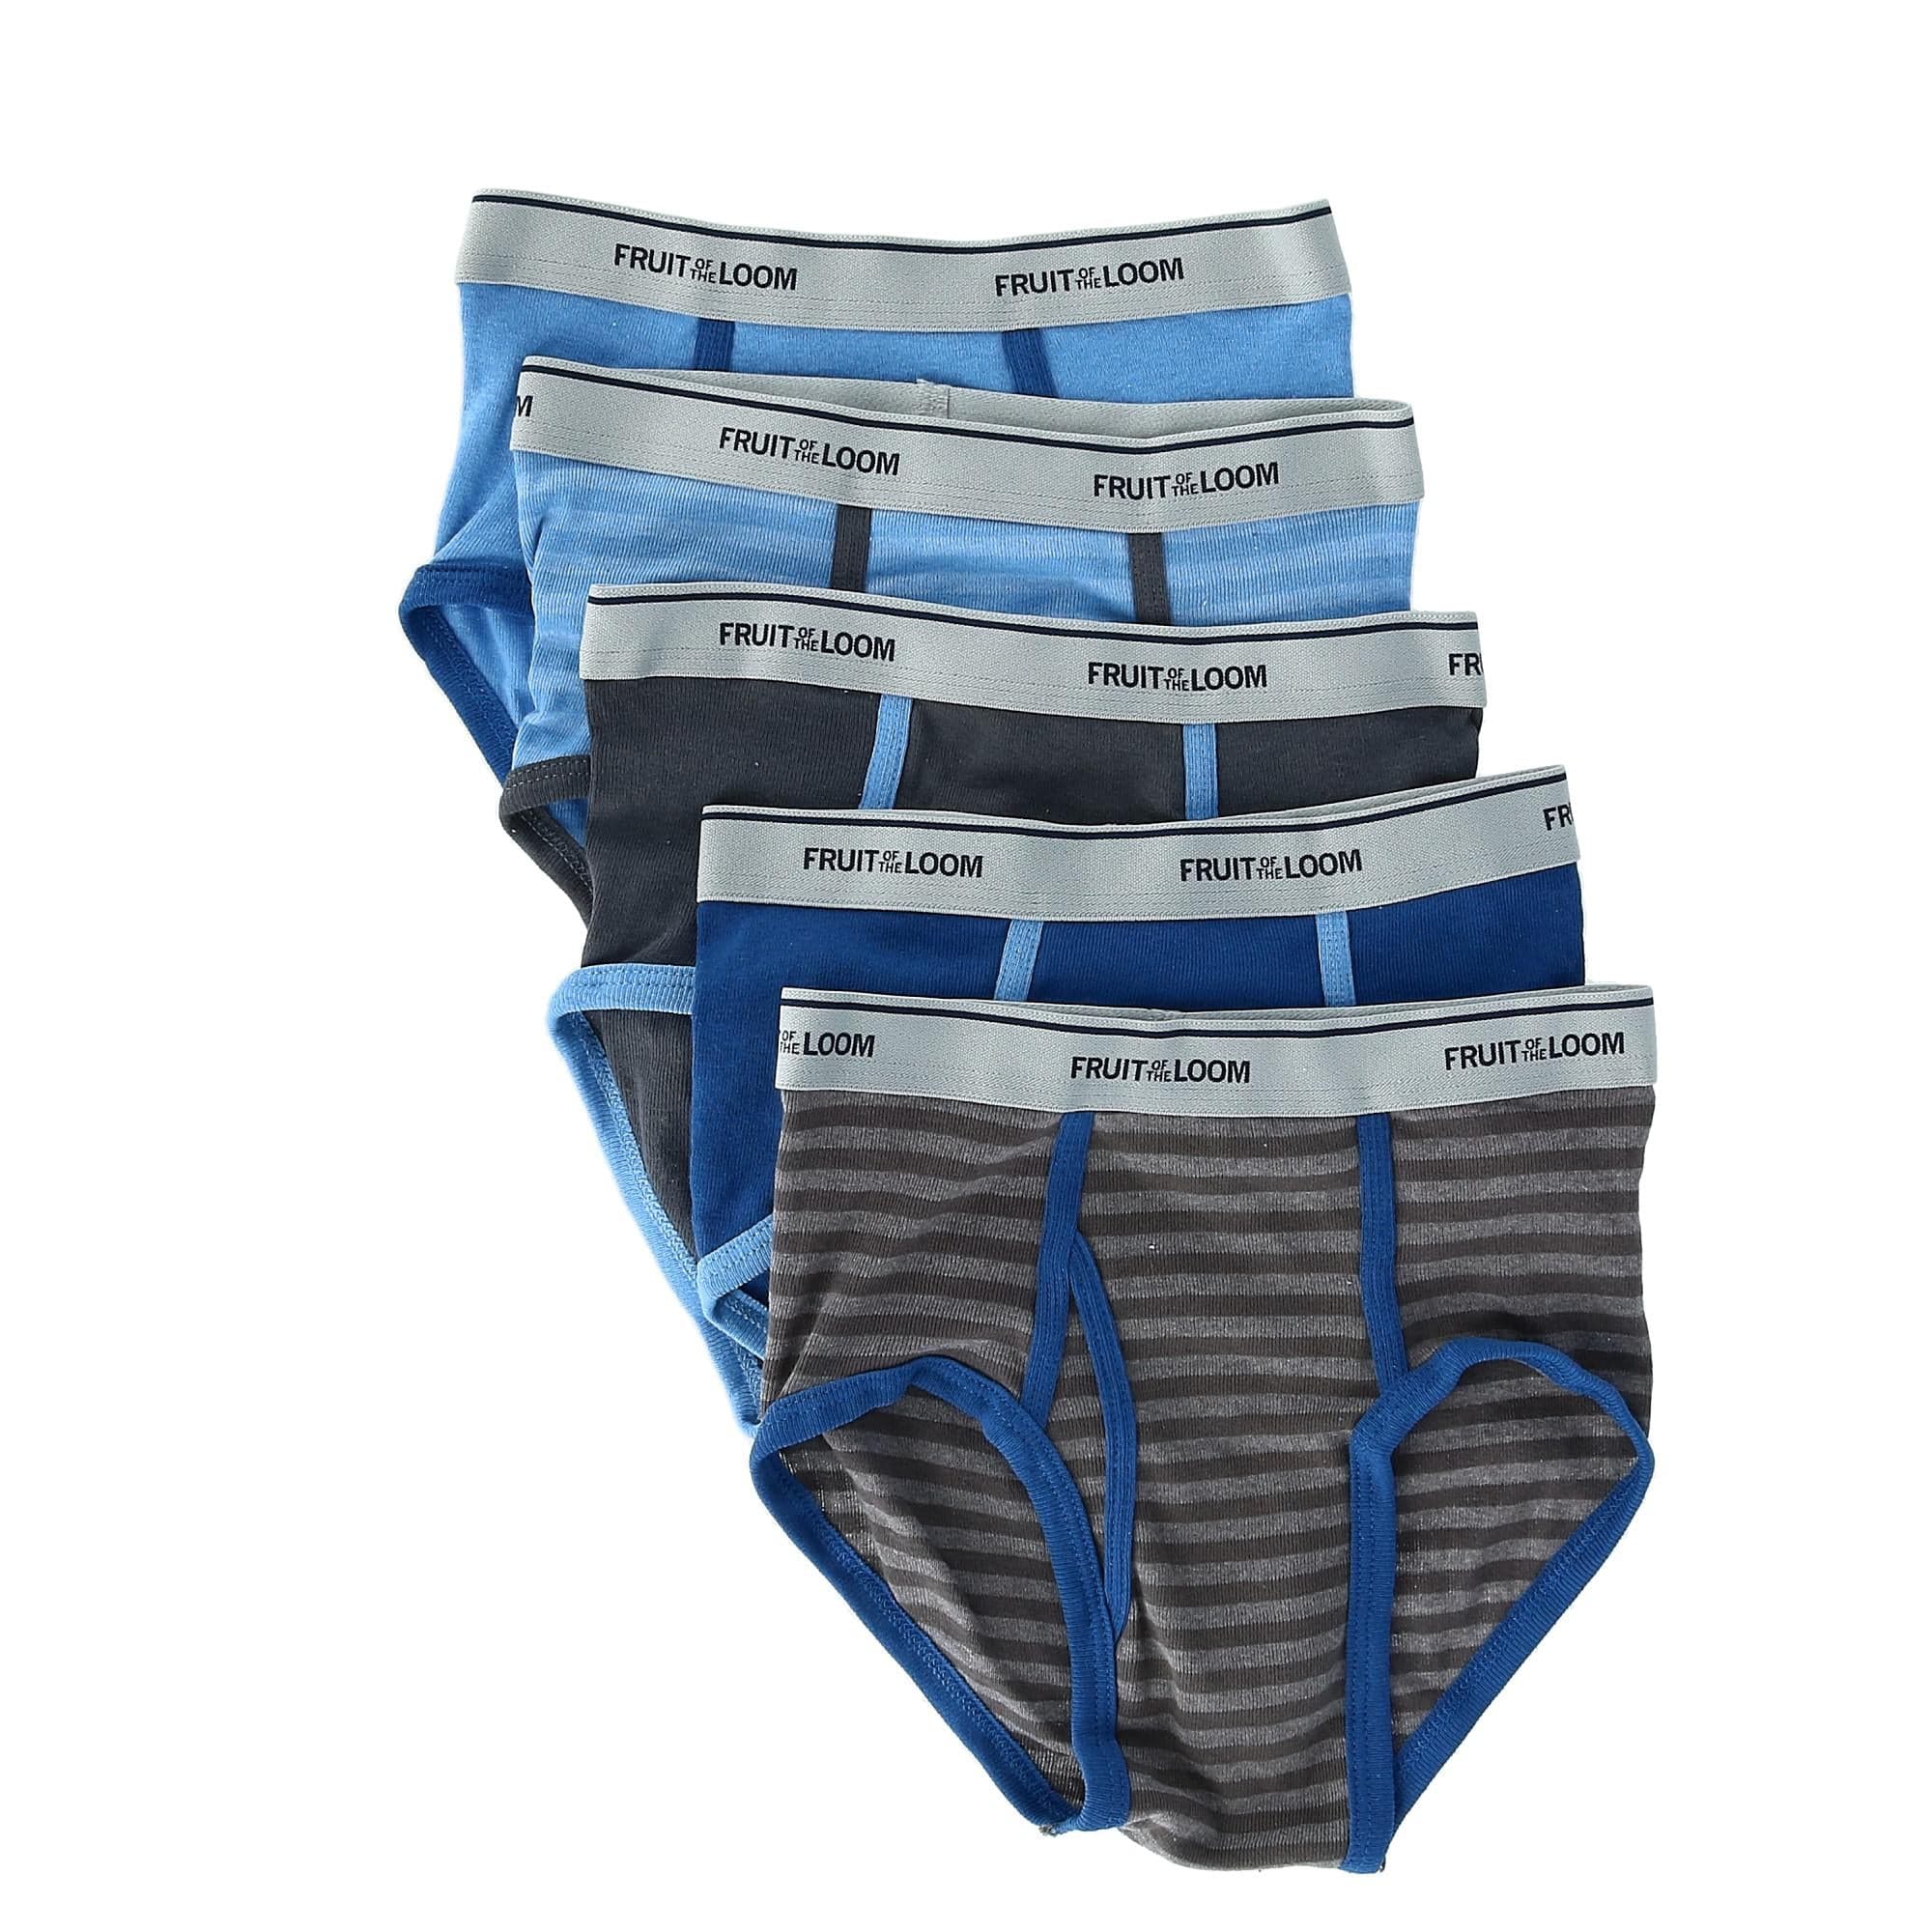 Fruit of the Loom Men's 5-Pack Assorted Briefs - Colors May Vary, AssortedL